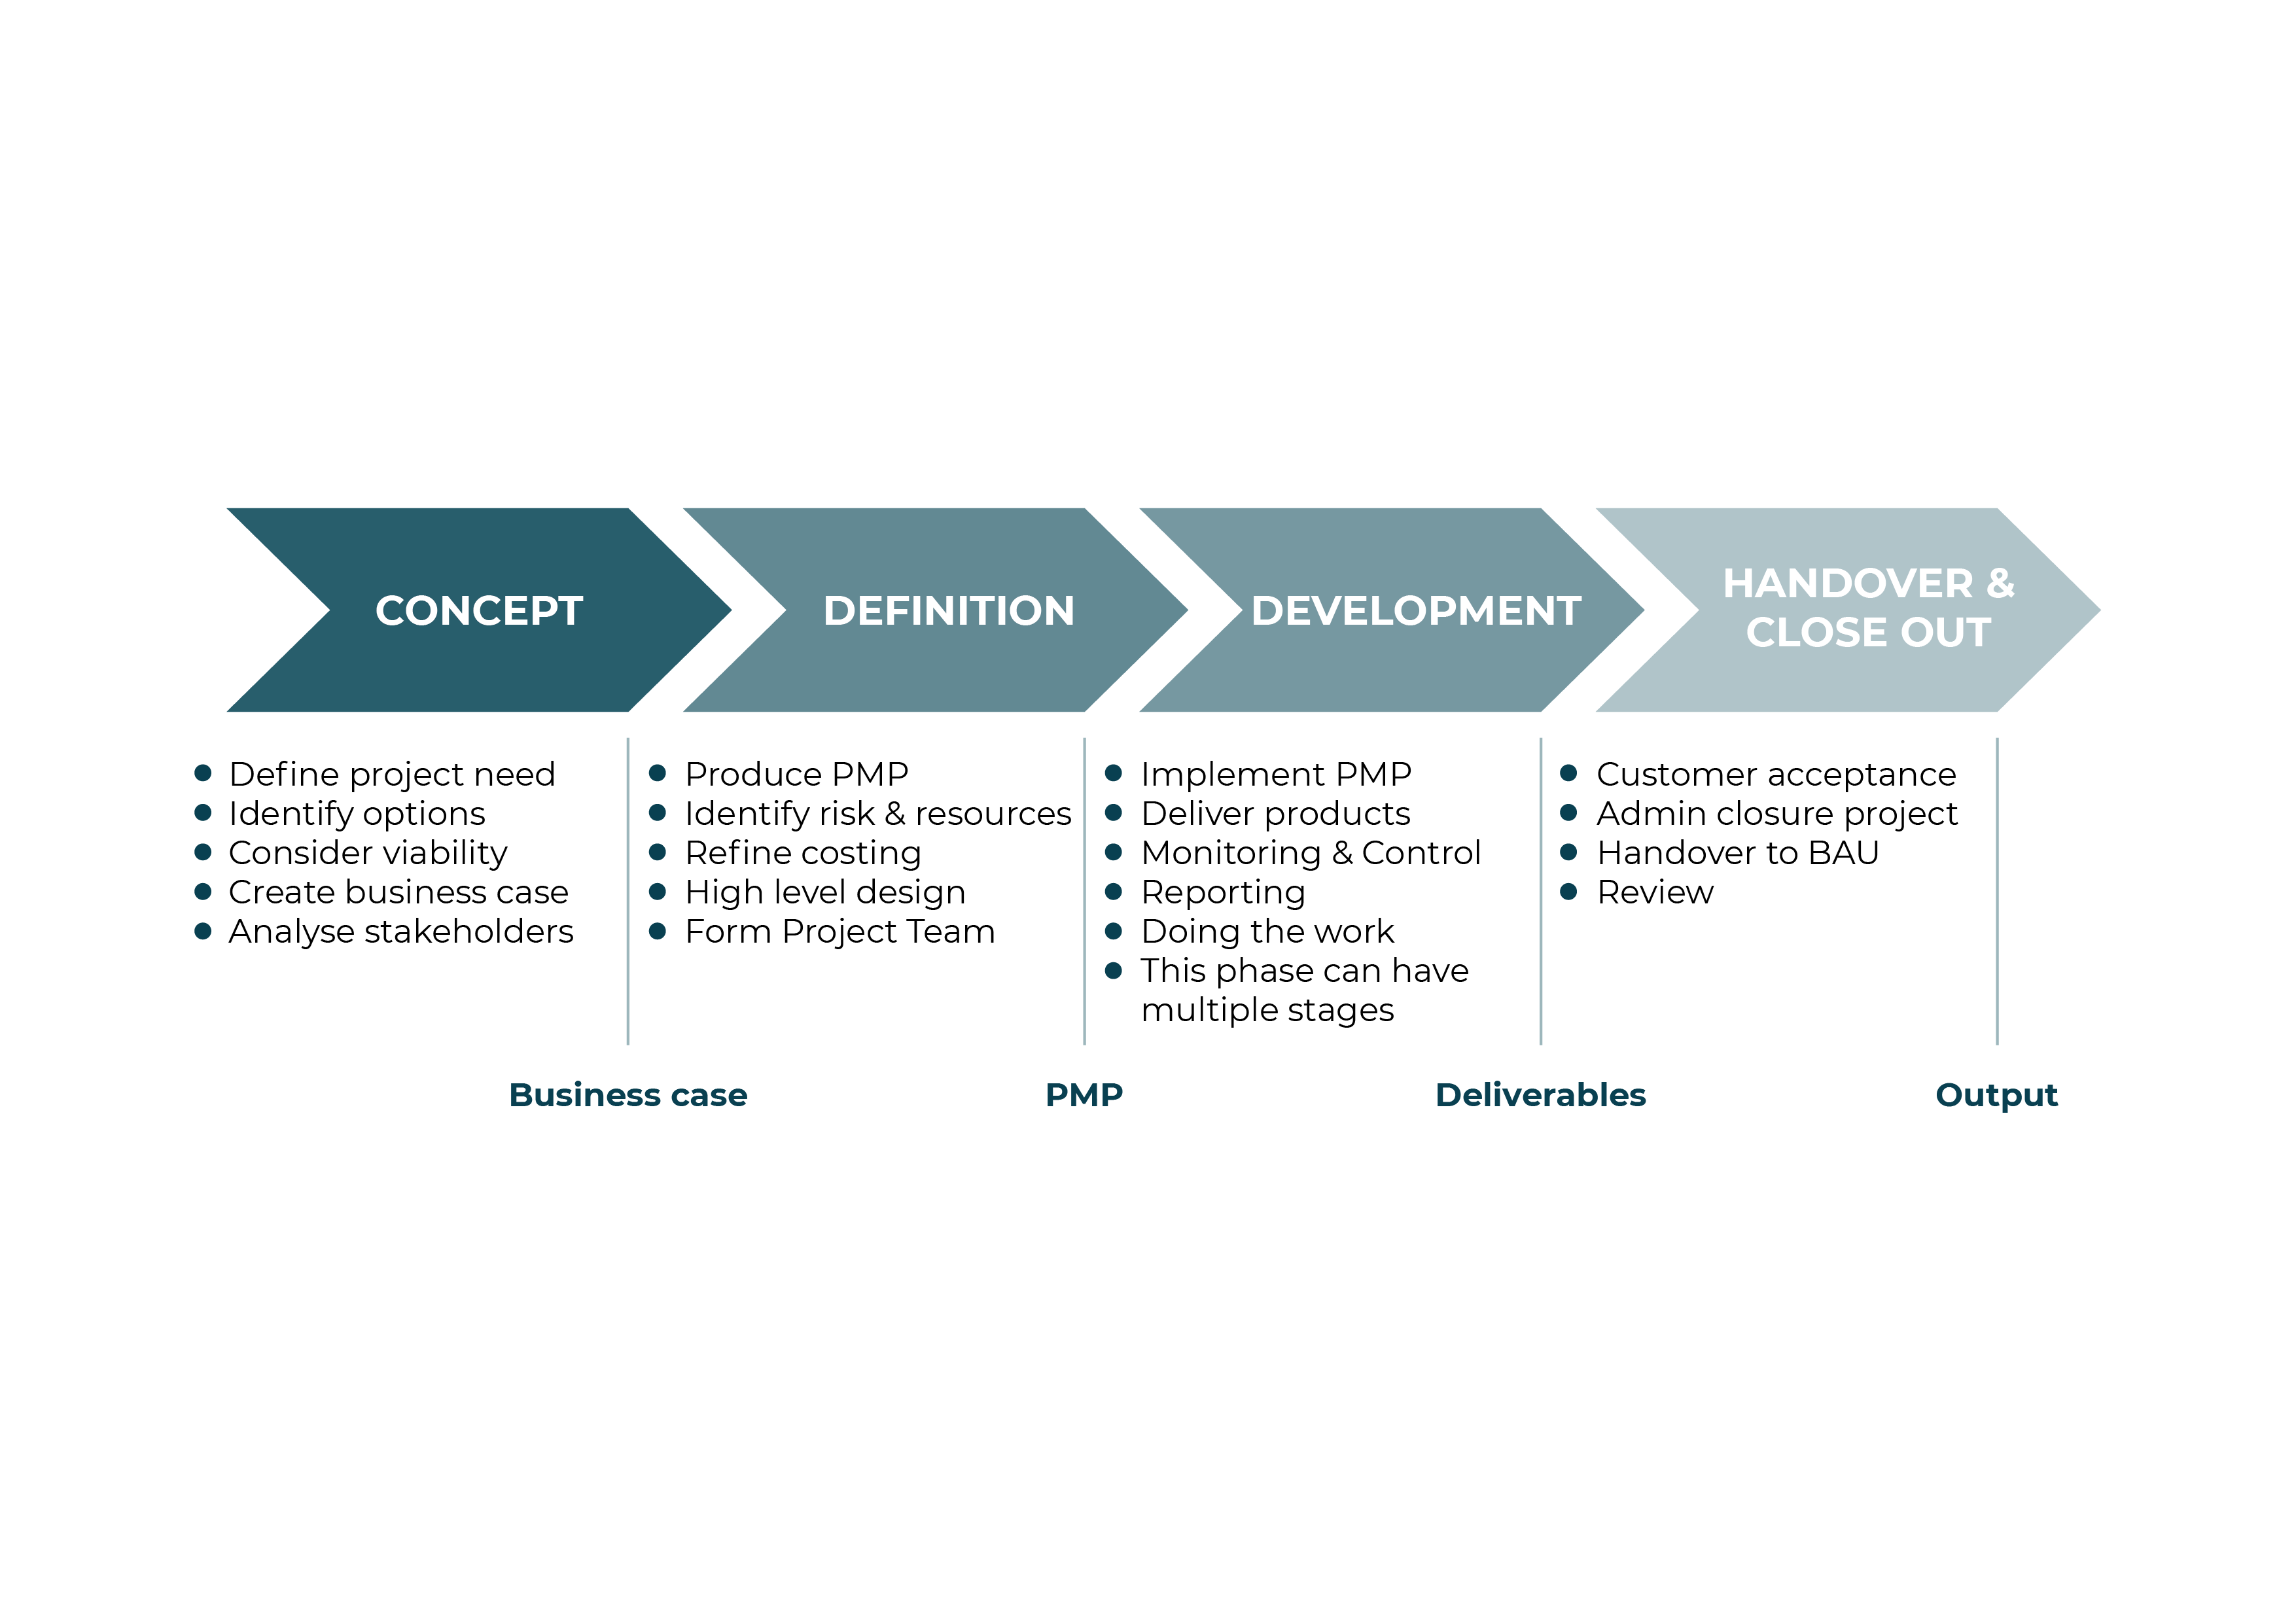 Diagram showing the contents of the PMP: concept, definition, development, and handover/close-out